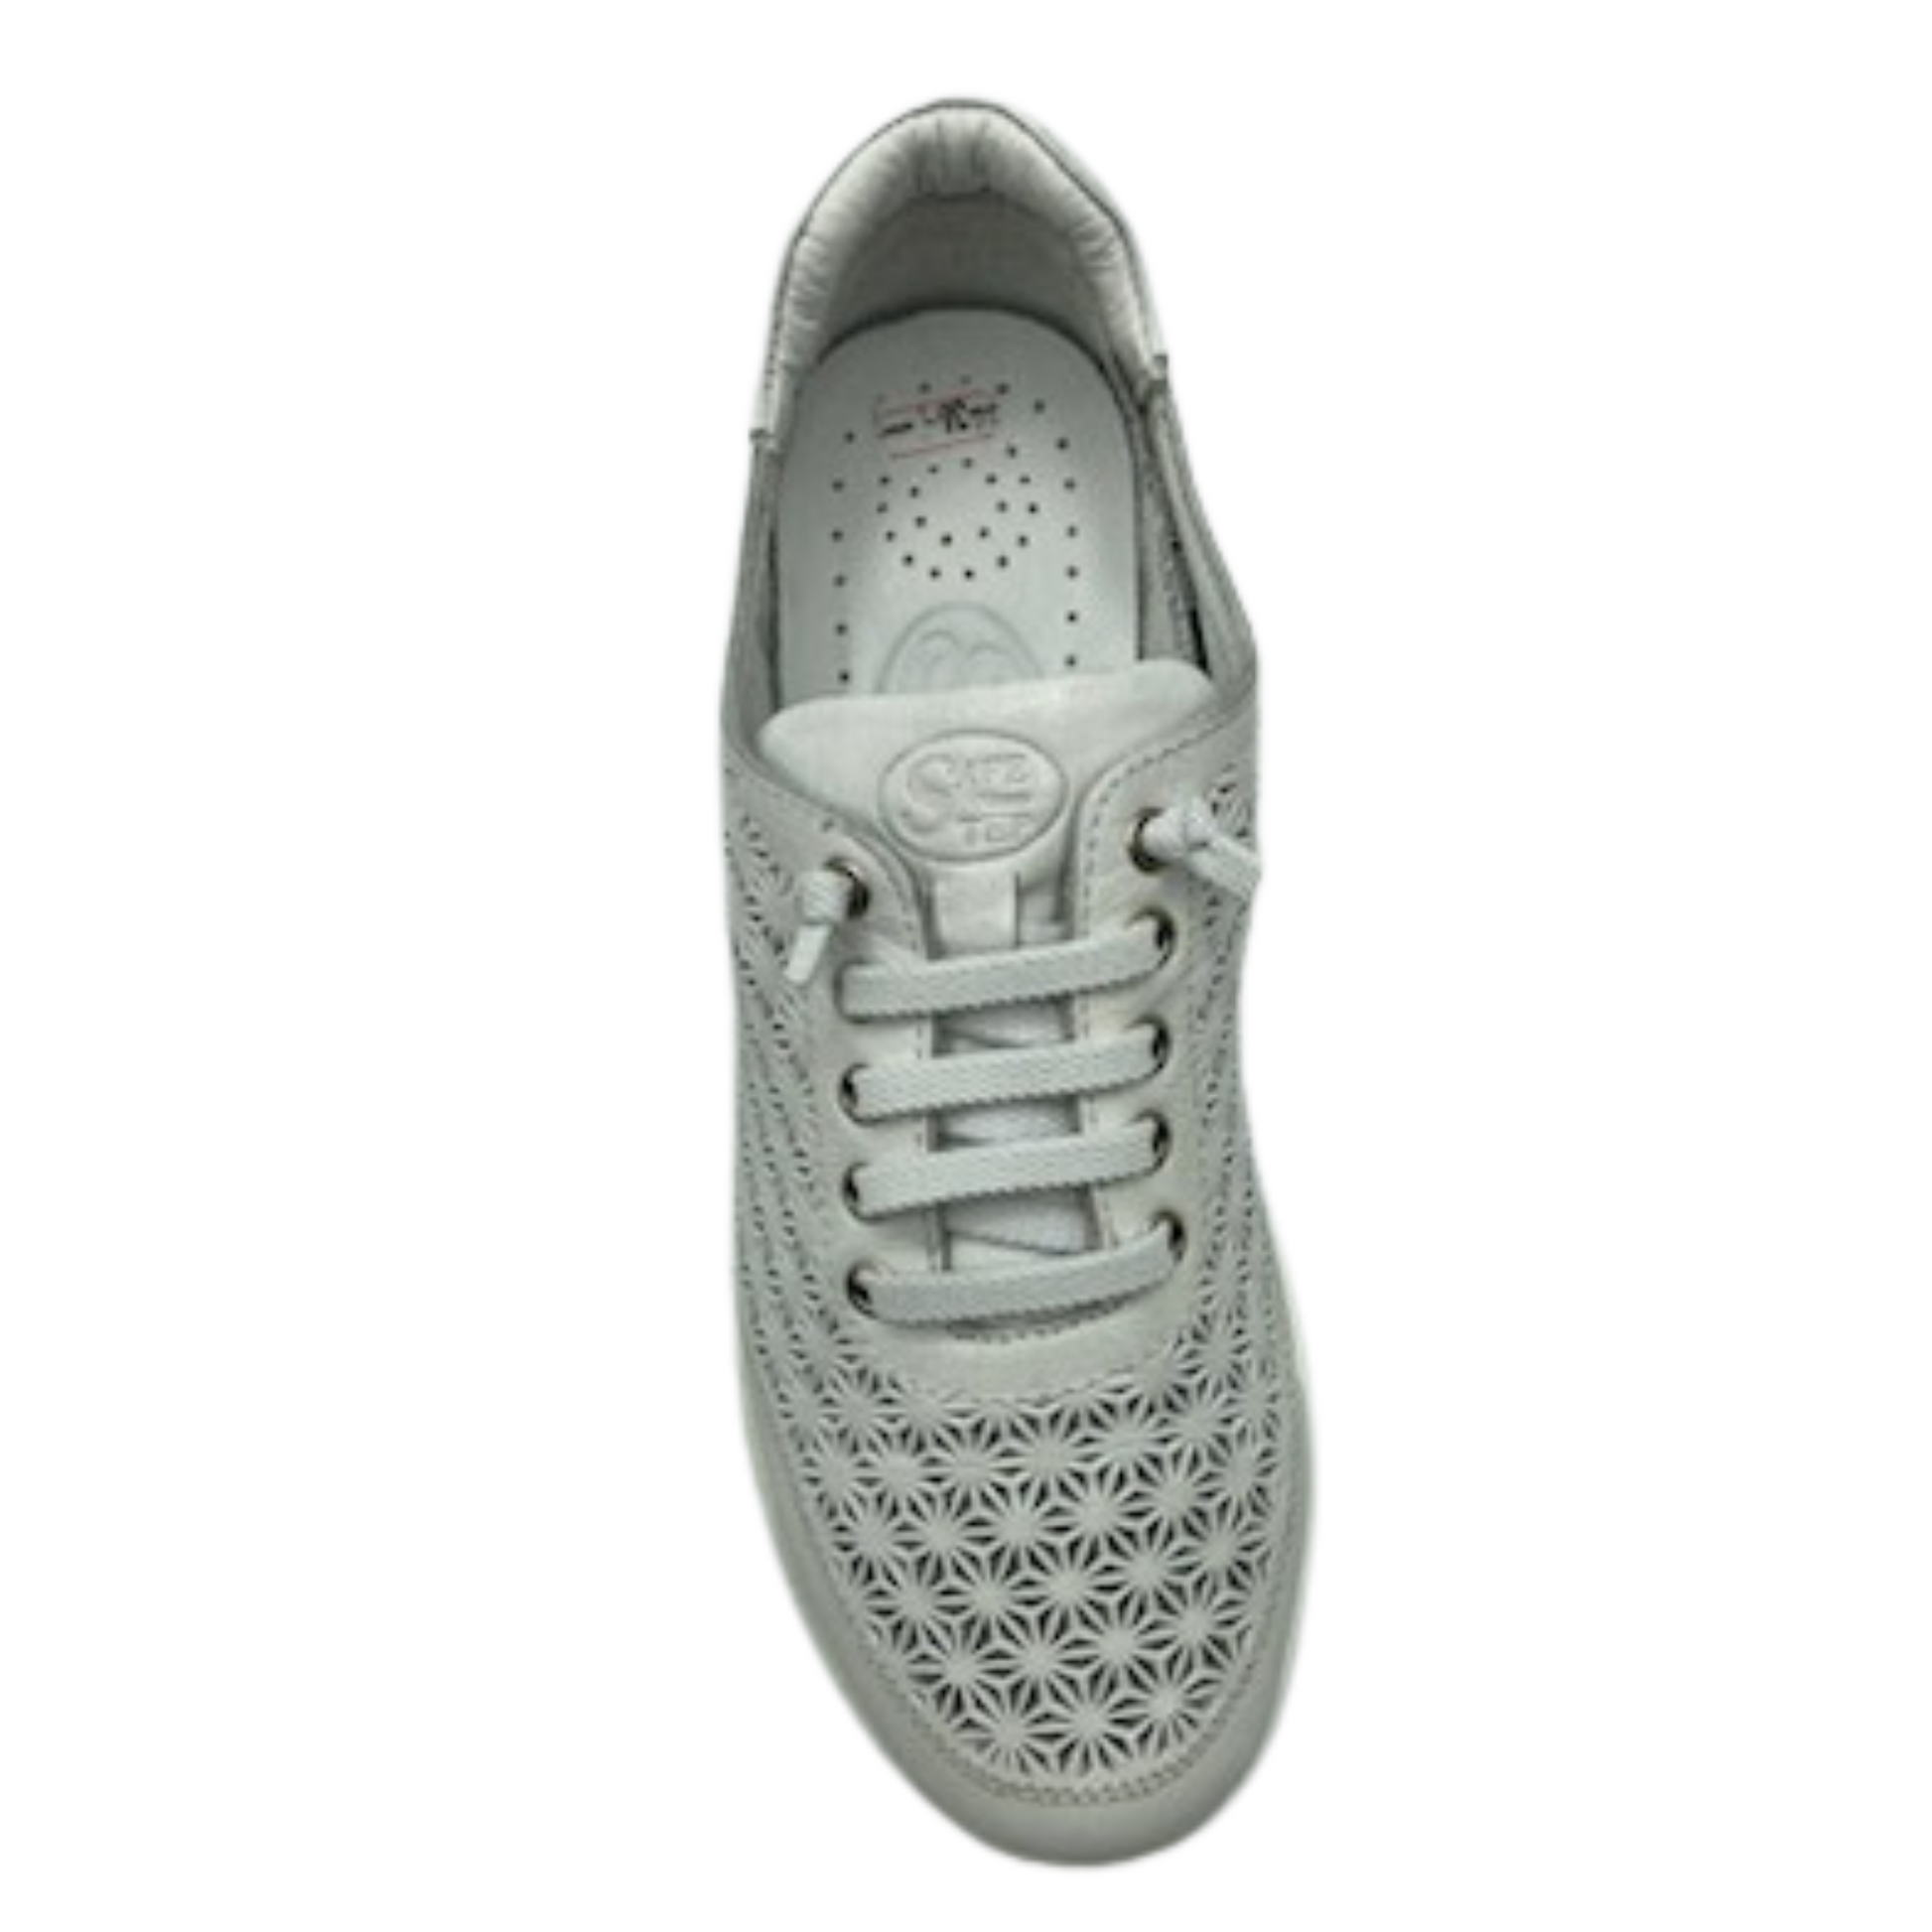 Top down view of perforated leather sneaker with breathable white insole